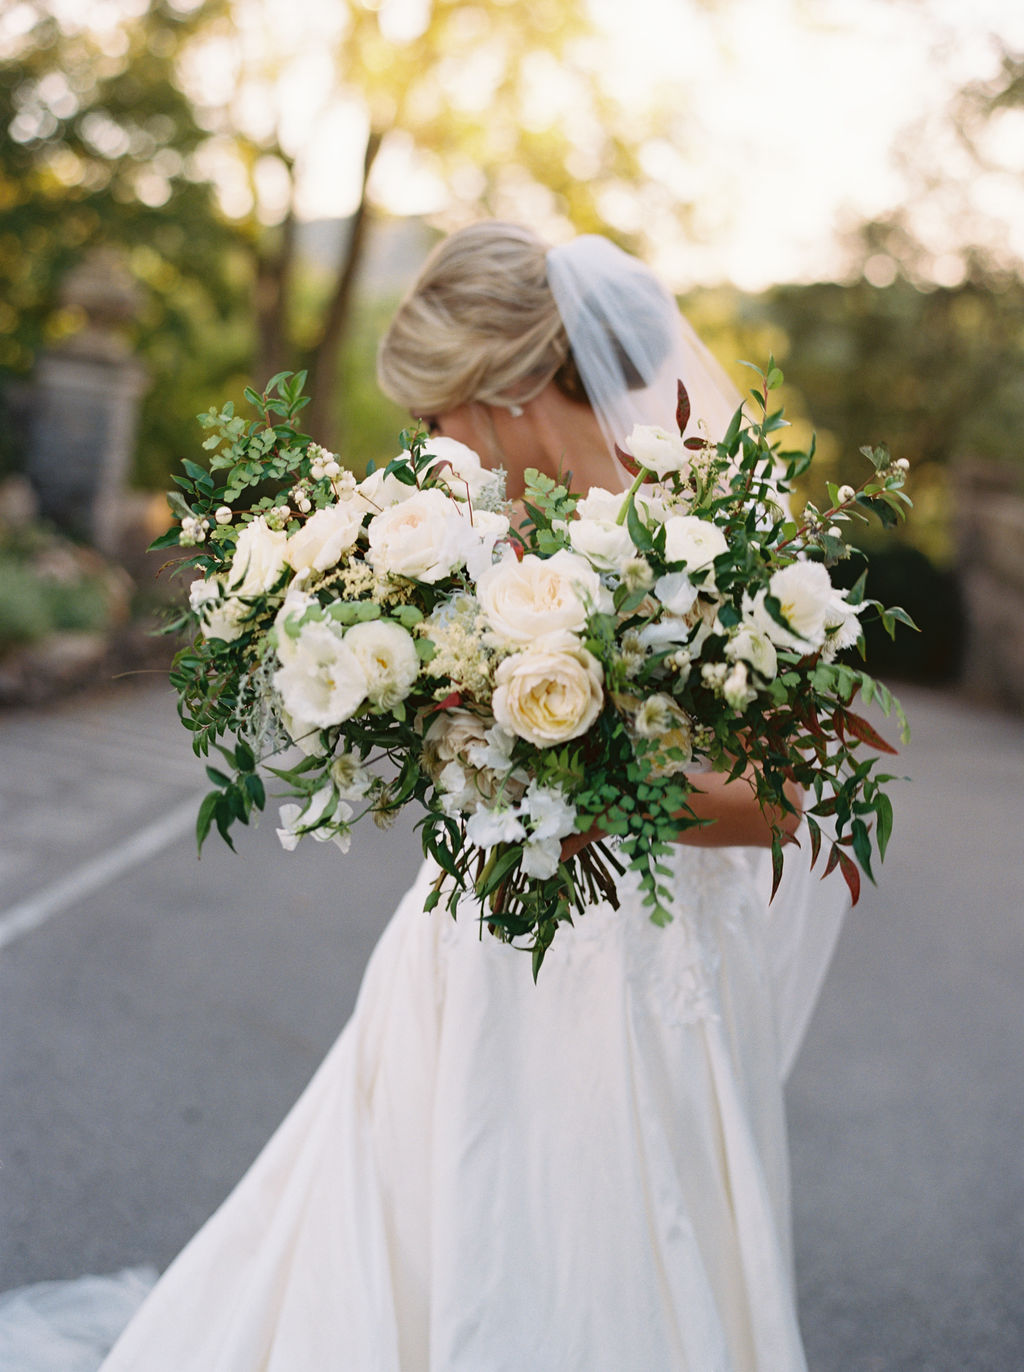 Untamed, asymmetrical bride’s bouquet with all white flowers and natural greenery. Southeast US Wedding Floral Design.